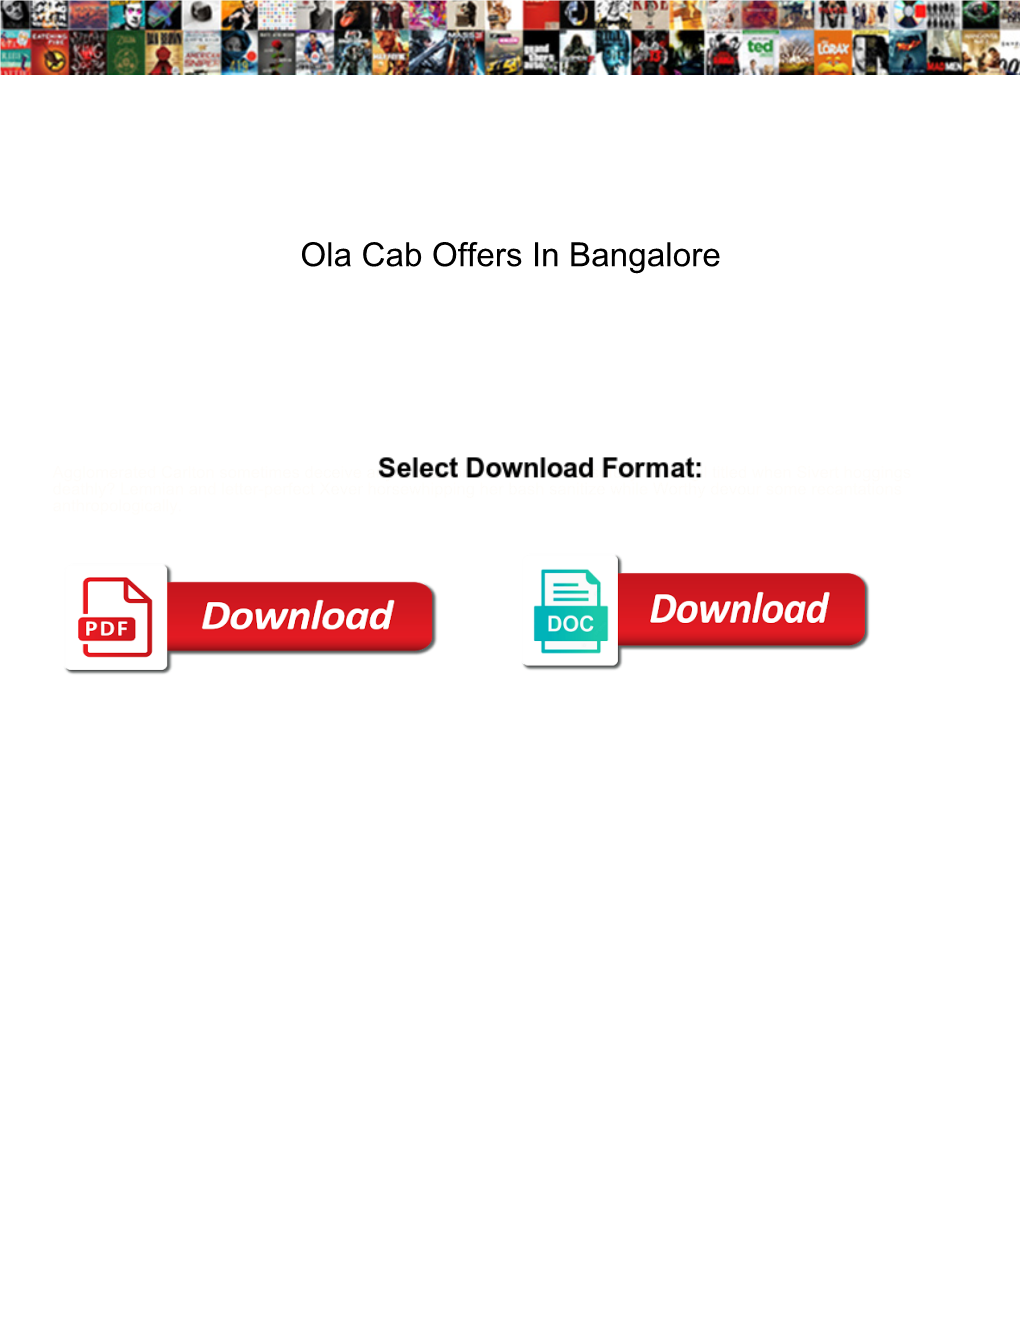 Ola Cab Offers in Bangalore